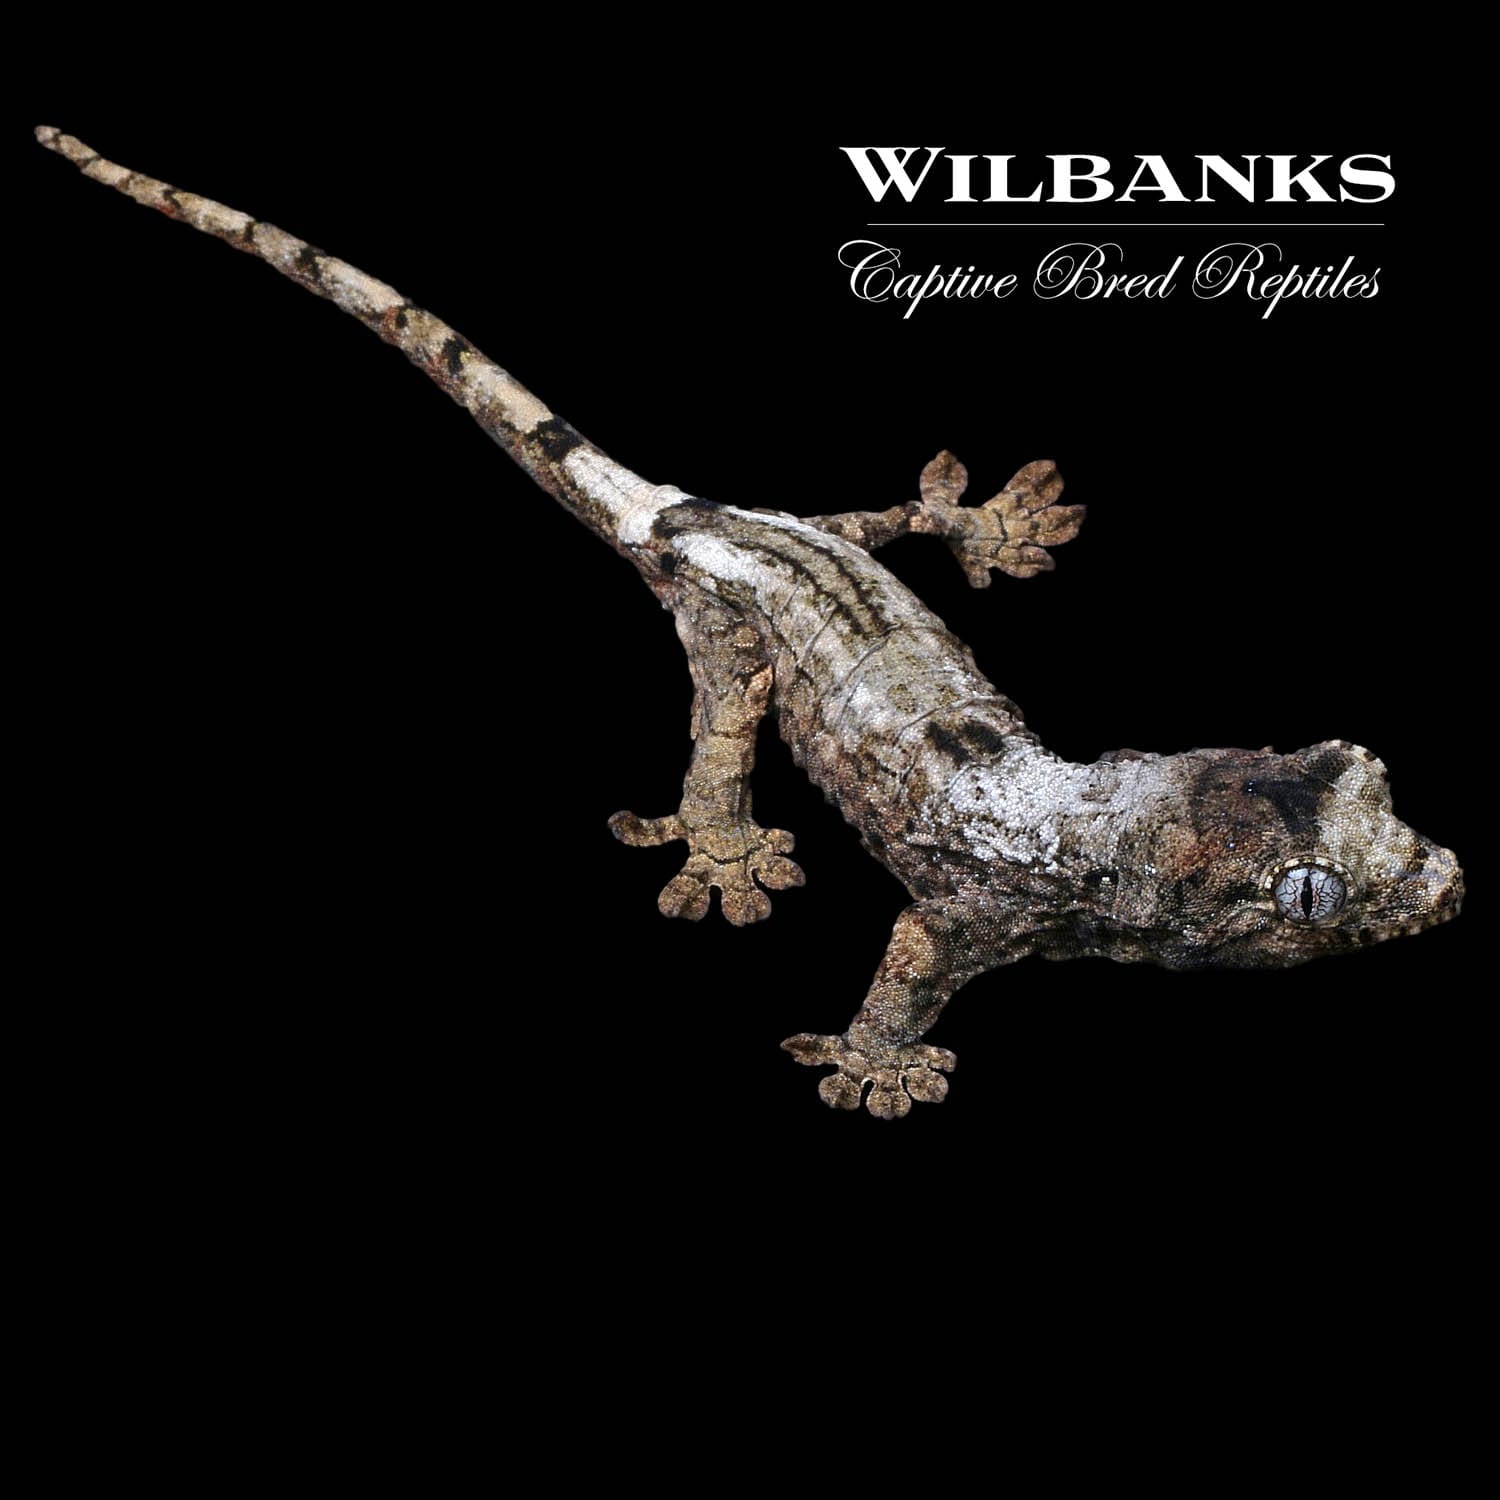 Pine Island White Out Chahoua Gecko by Wilbanks Captive Bred Reptiles